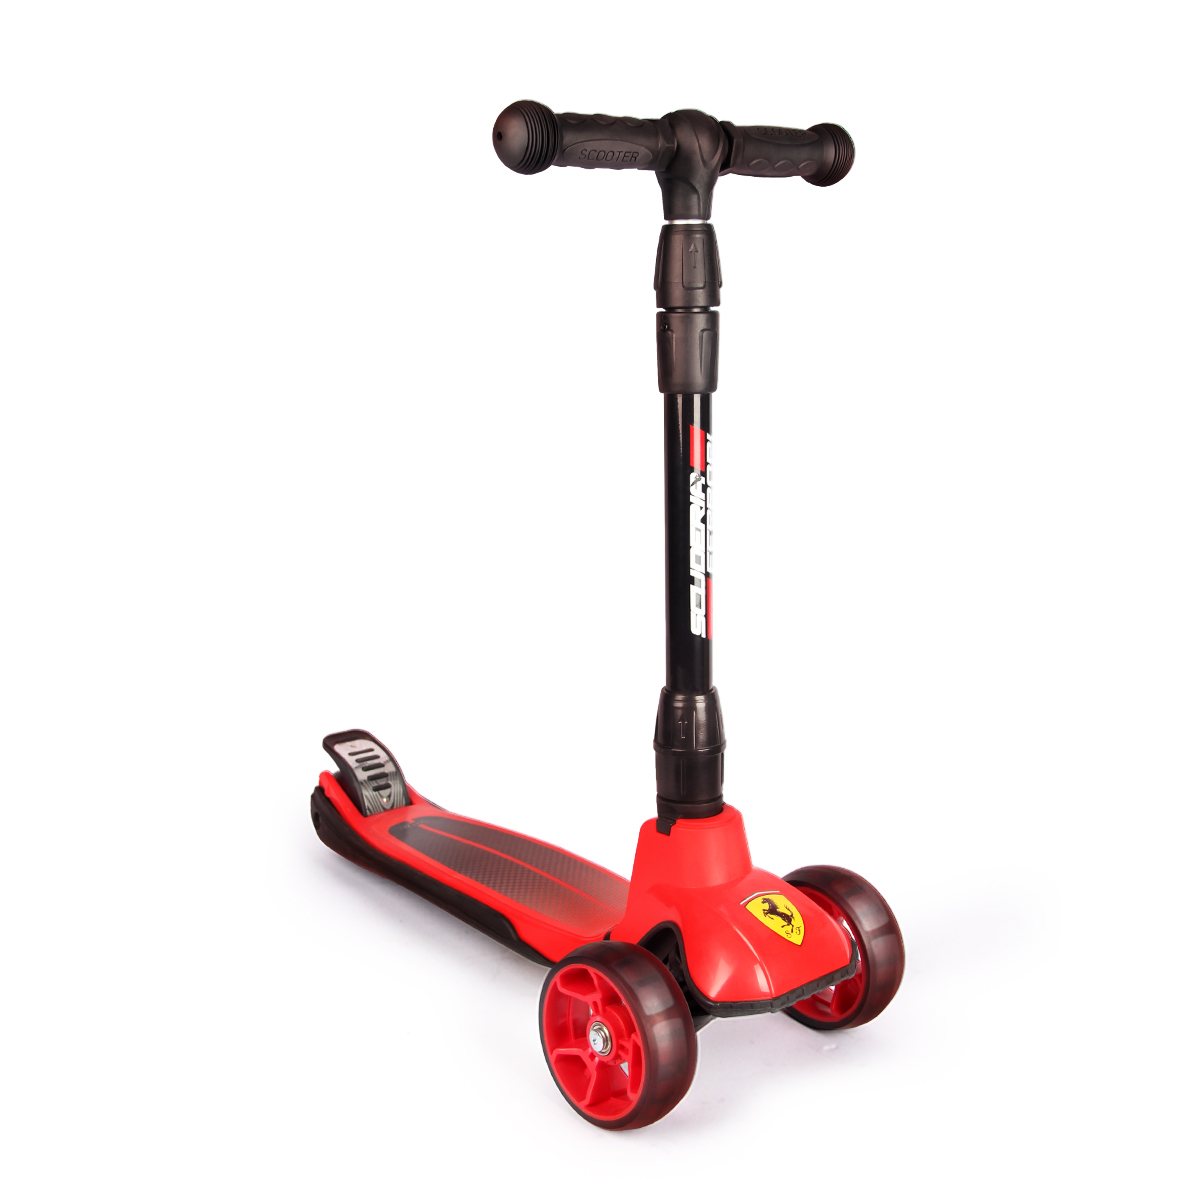 FERRARI FXK58 FOLDABLE TWIST SCOOTER FOR KIDS WITH ADJUSTABLE HEIGHT, LED LIGHTS (MEDIUM), AGED 3 to 10